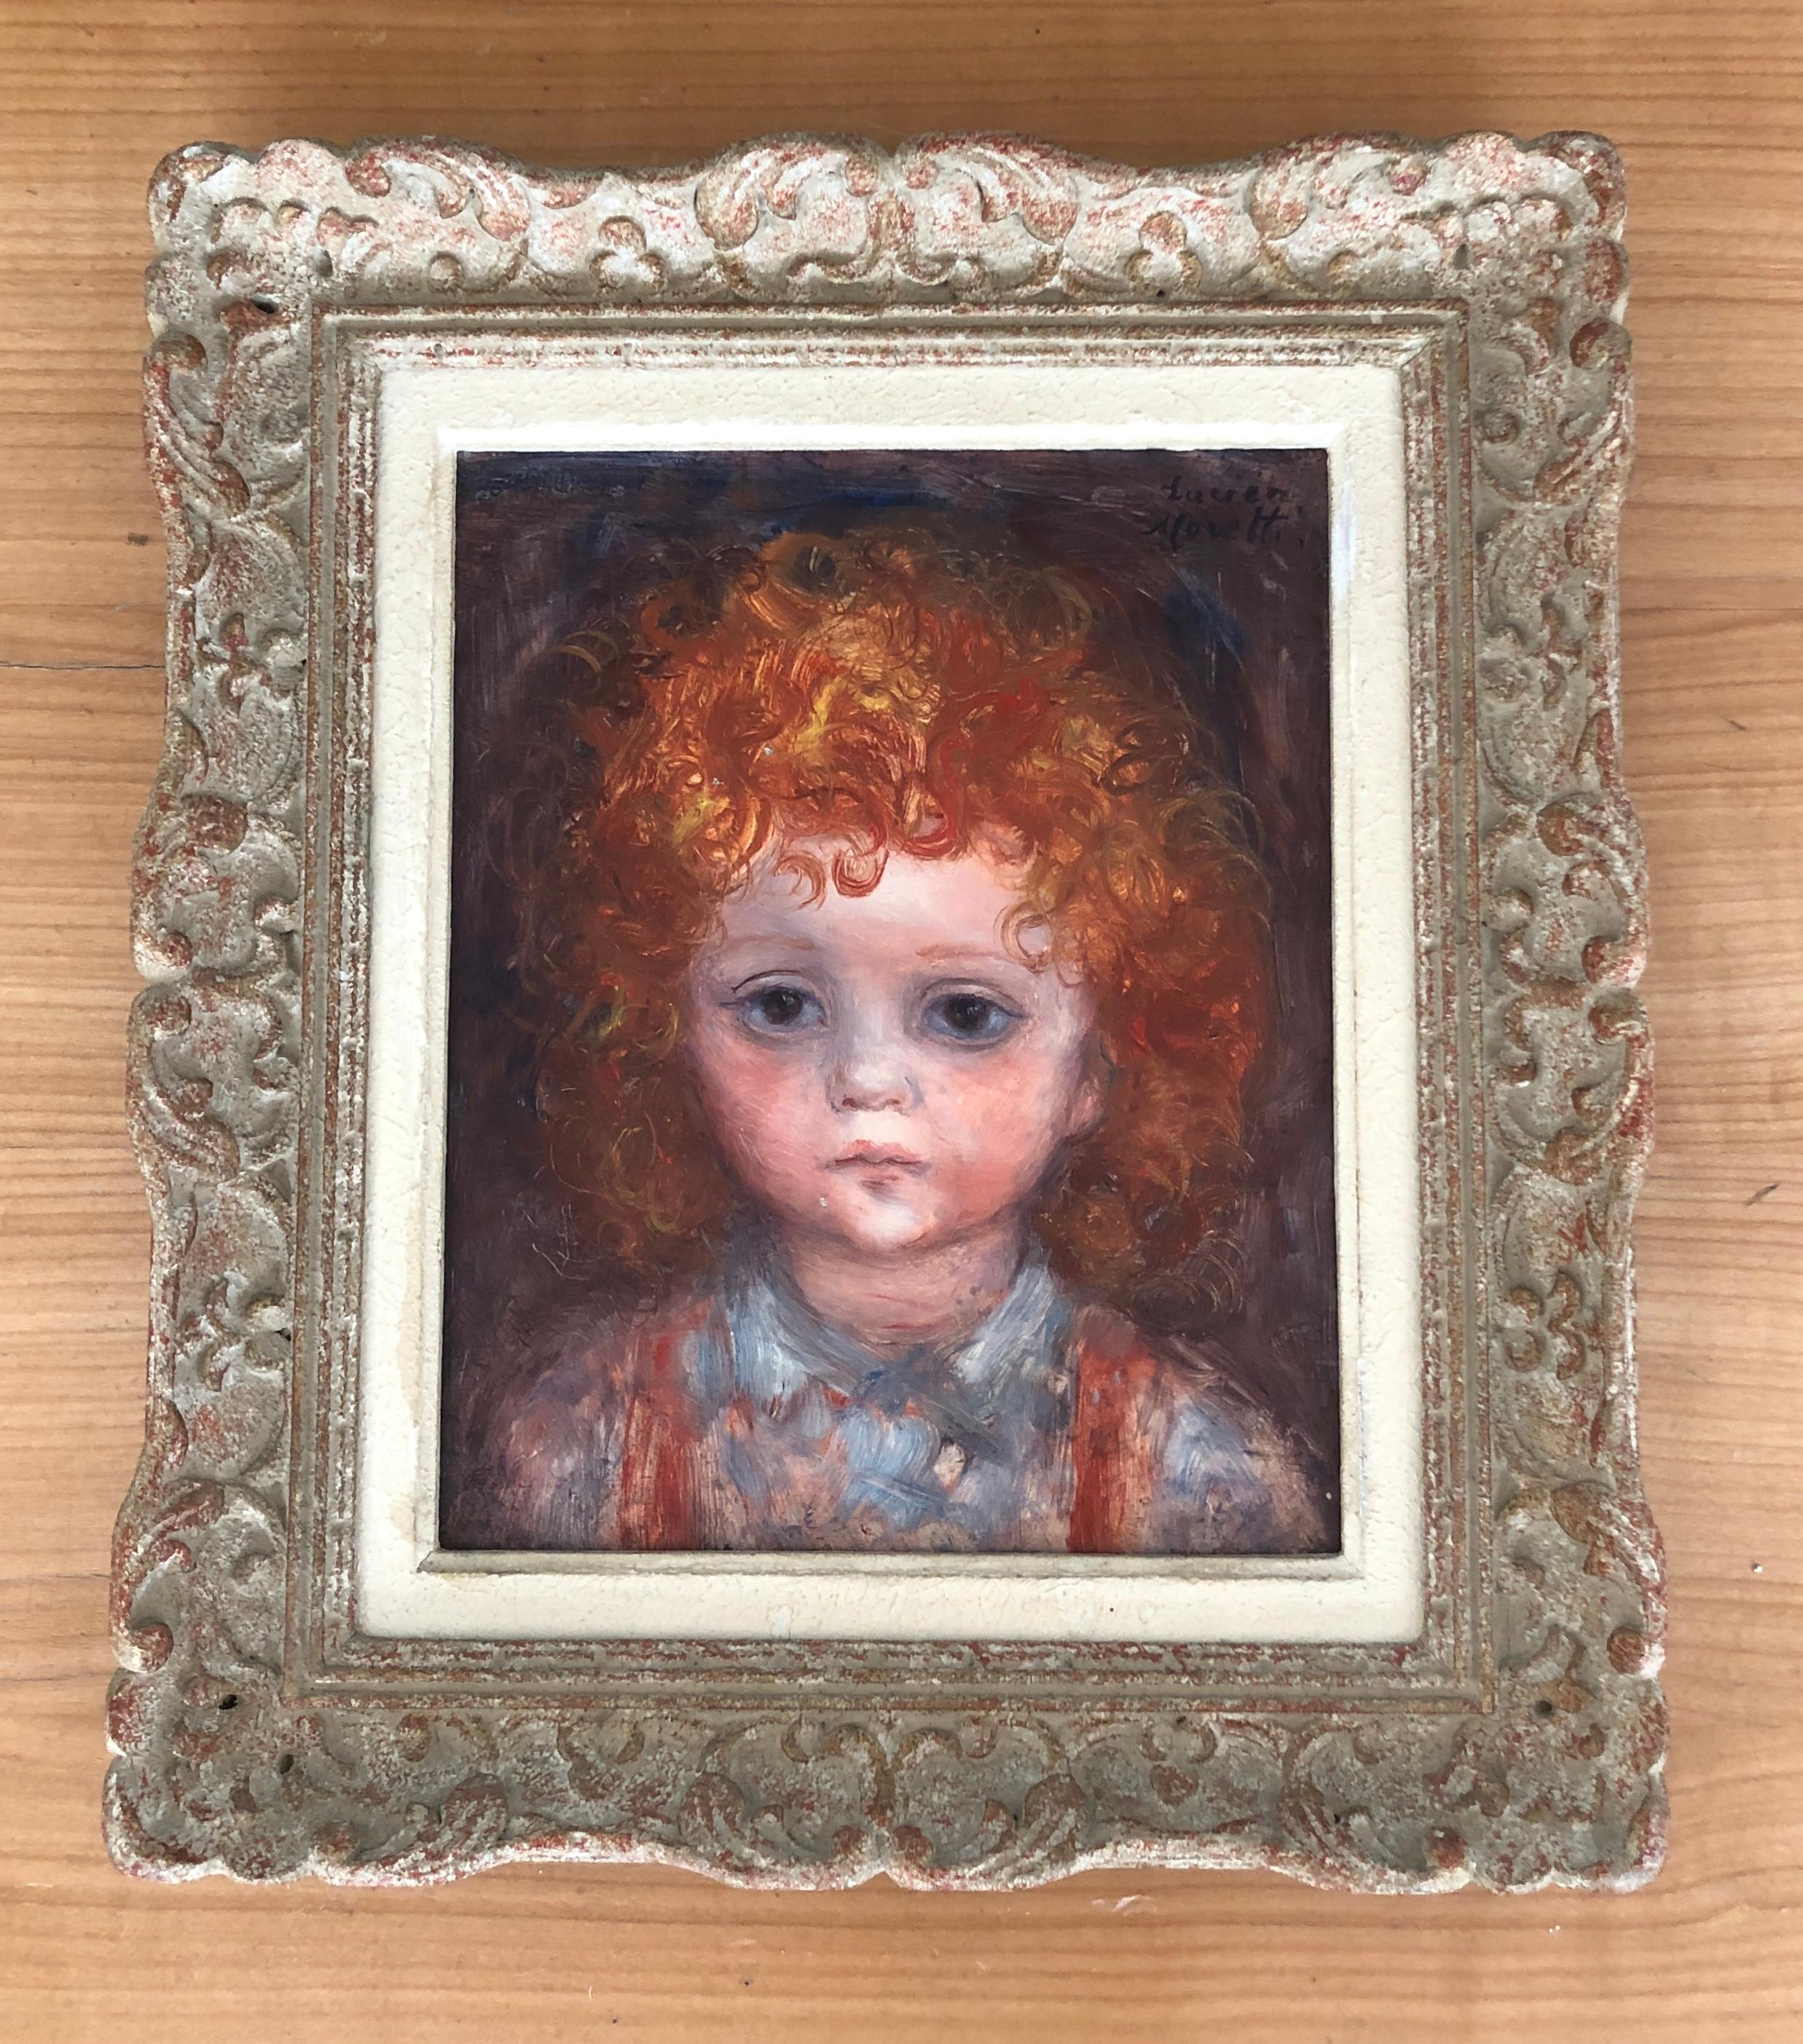 Little girl with red curls - Painting by Lucien Philippe Moretti